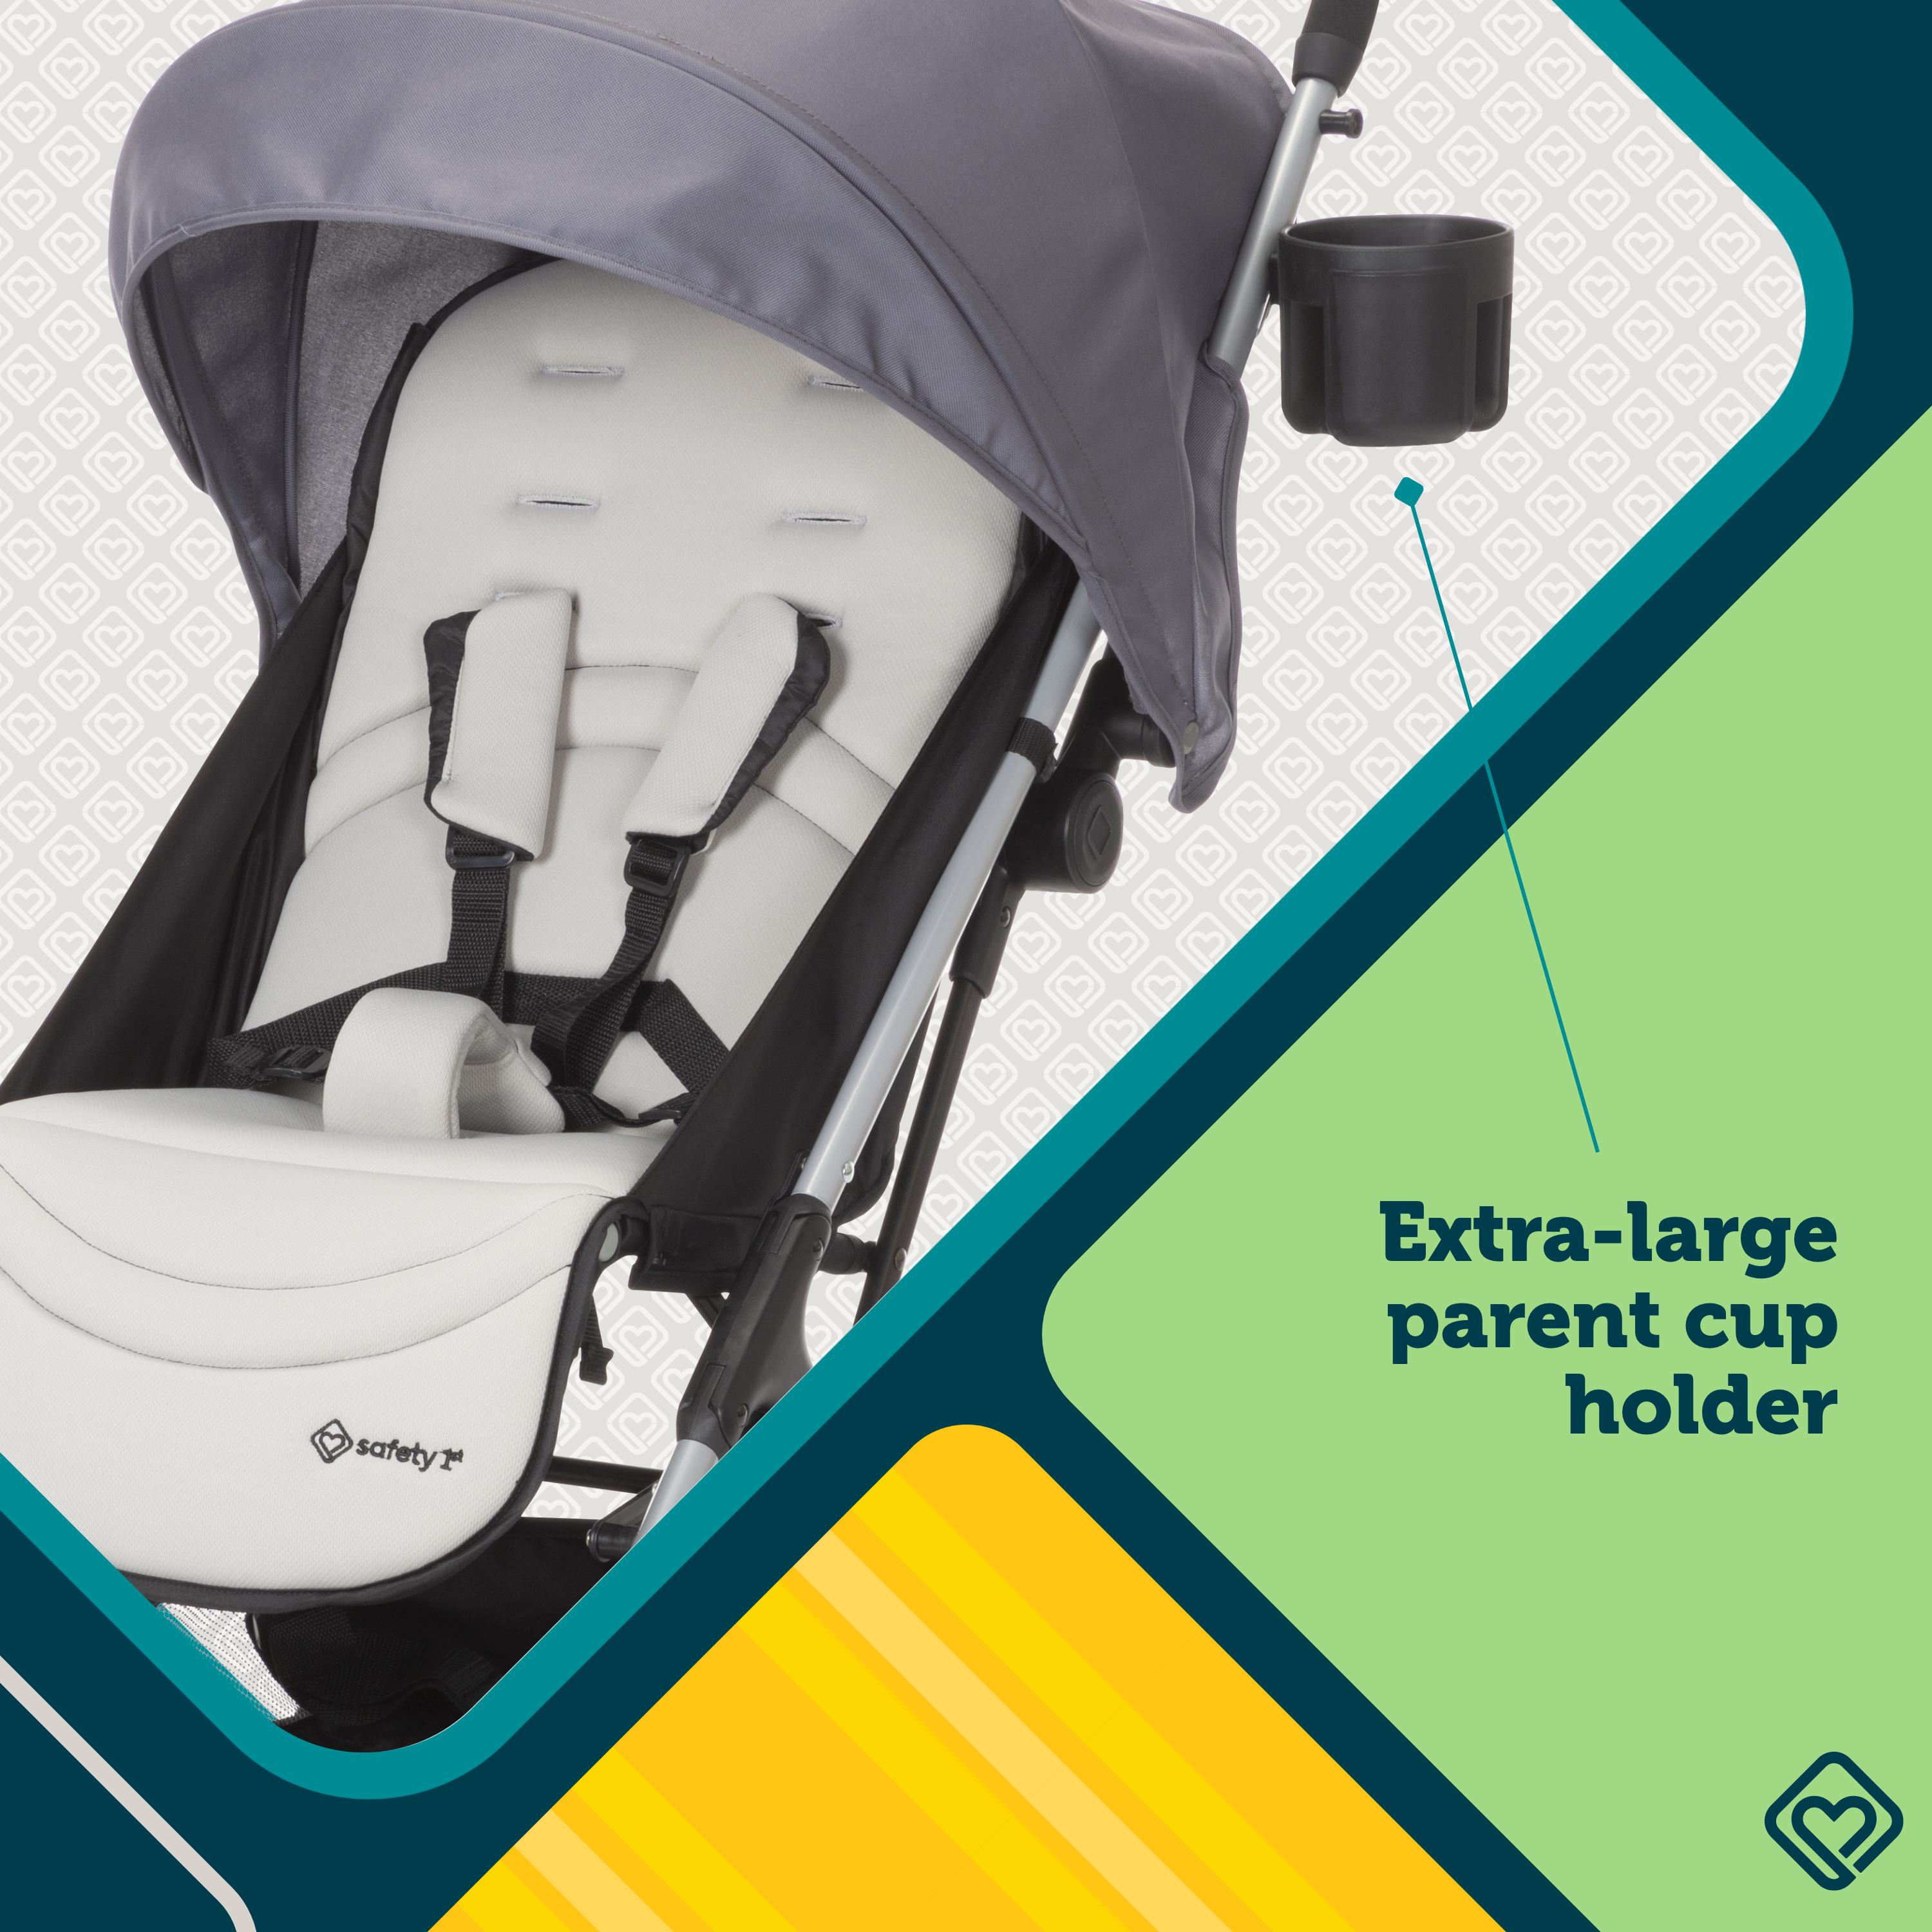 Easy-Fold Compact Stroller - extra-large parent cup holder